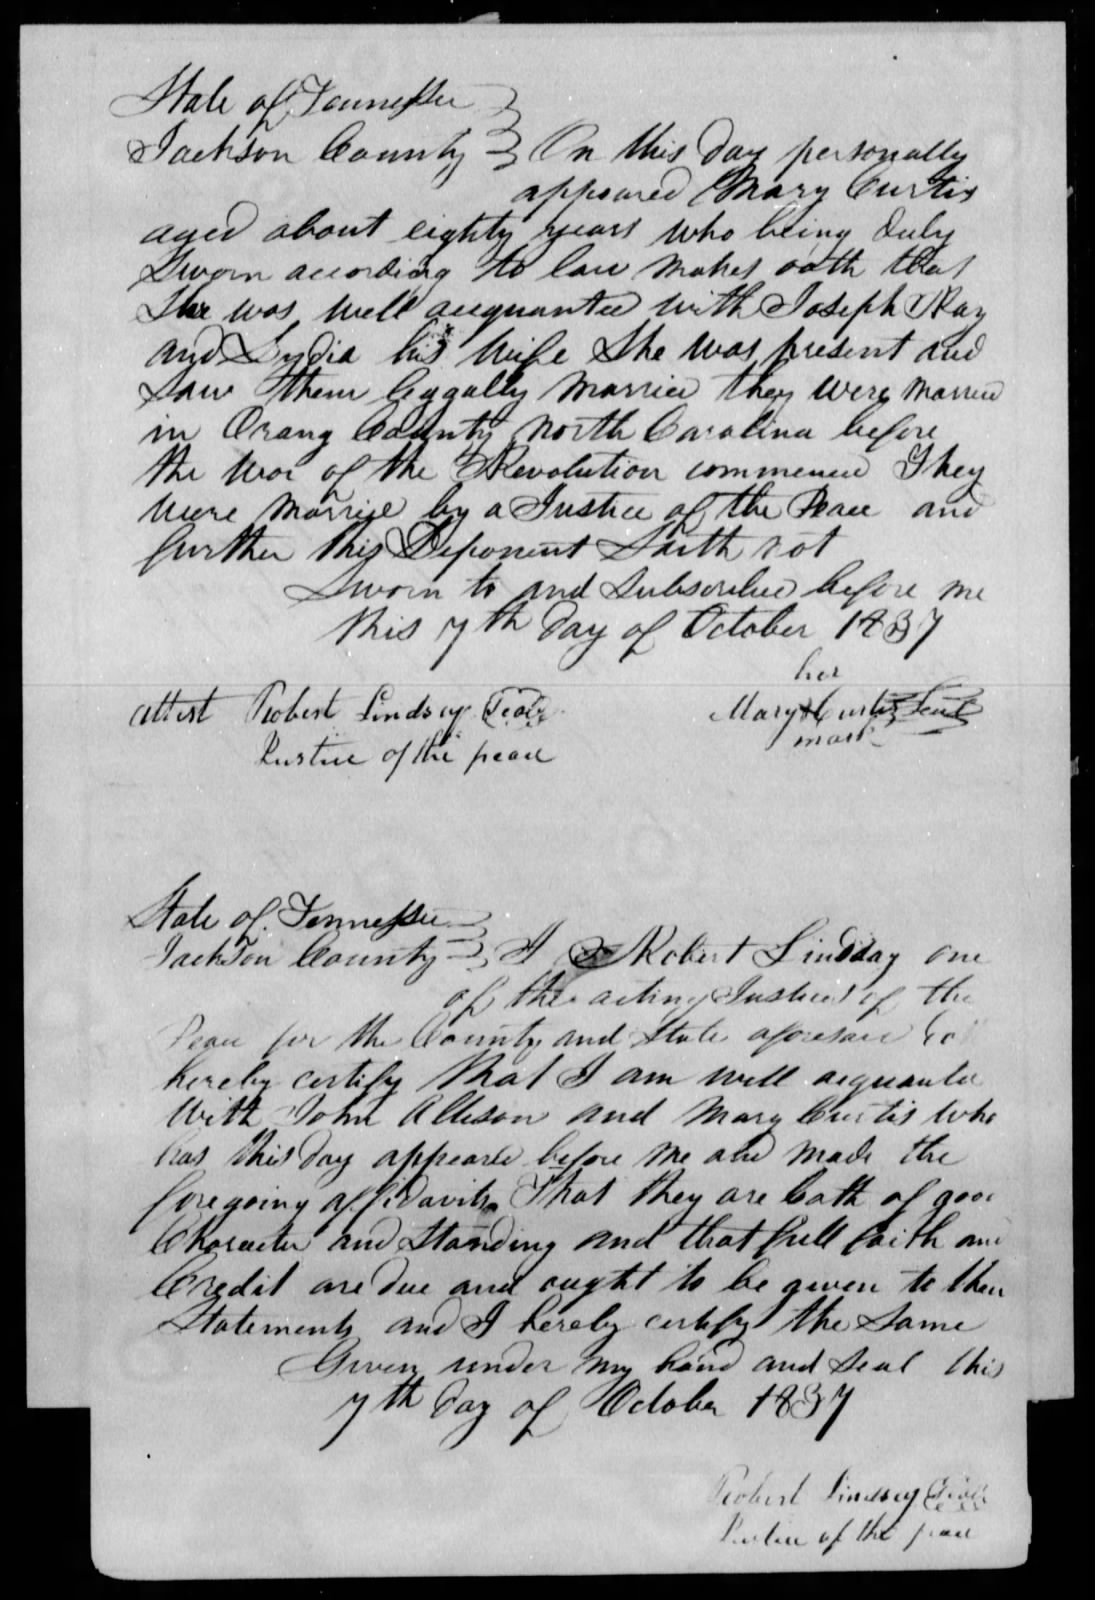 Affidavit of Mary Curtis in support of a Pension Claim for Lydia Ray, 7 October 1837